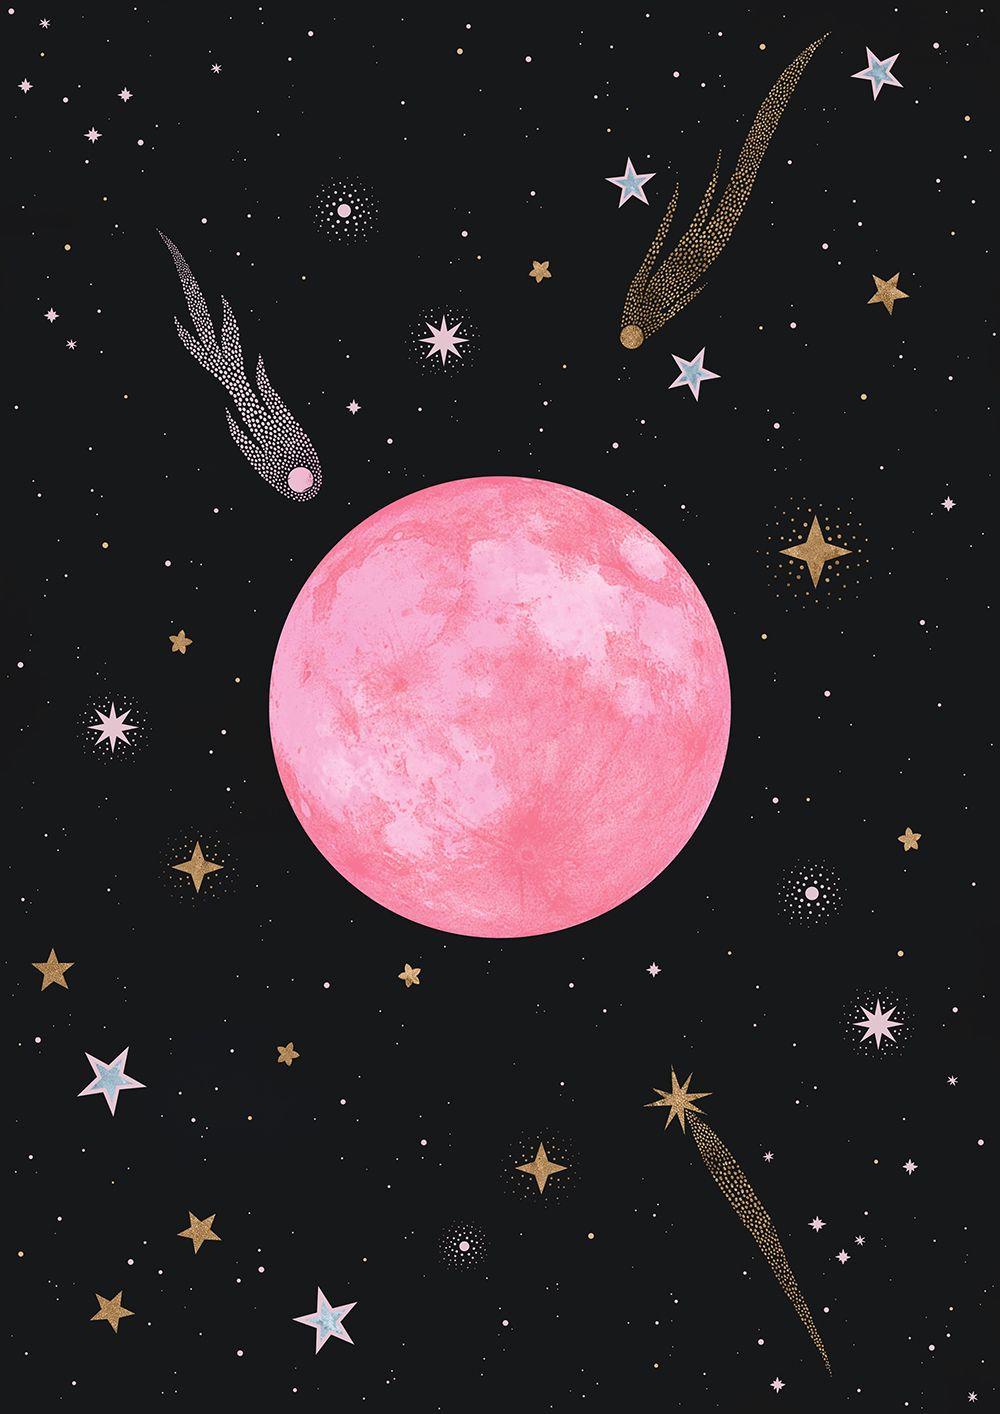 Carly Watts Illustration: Strawberry Moon #space #moon